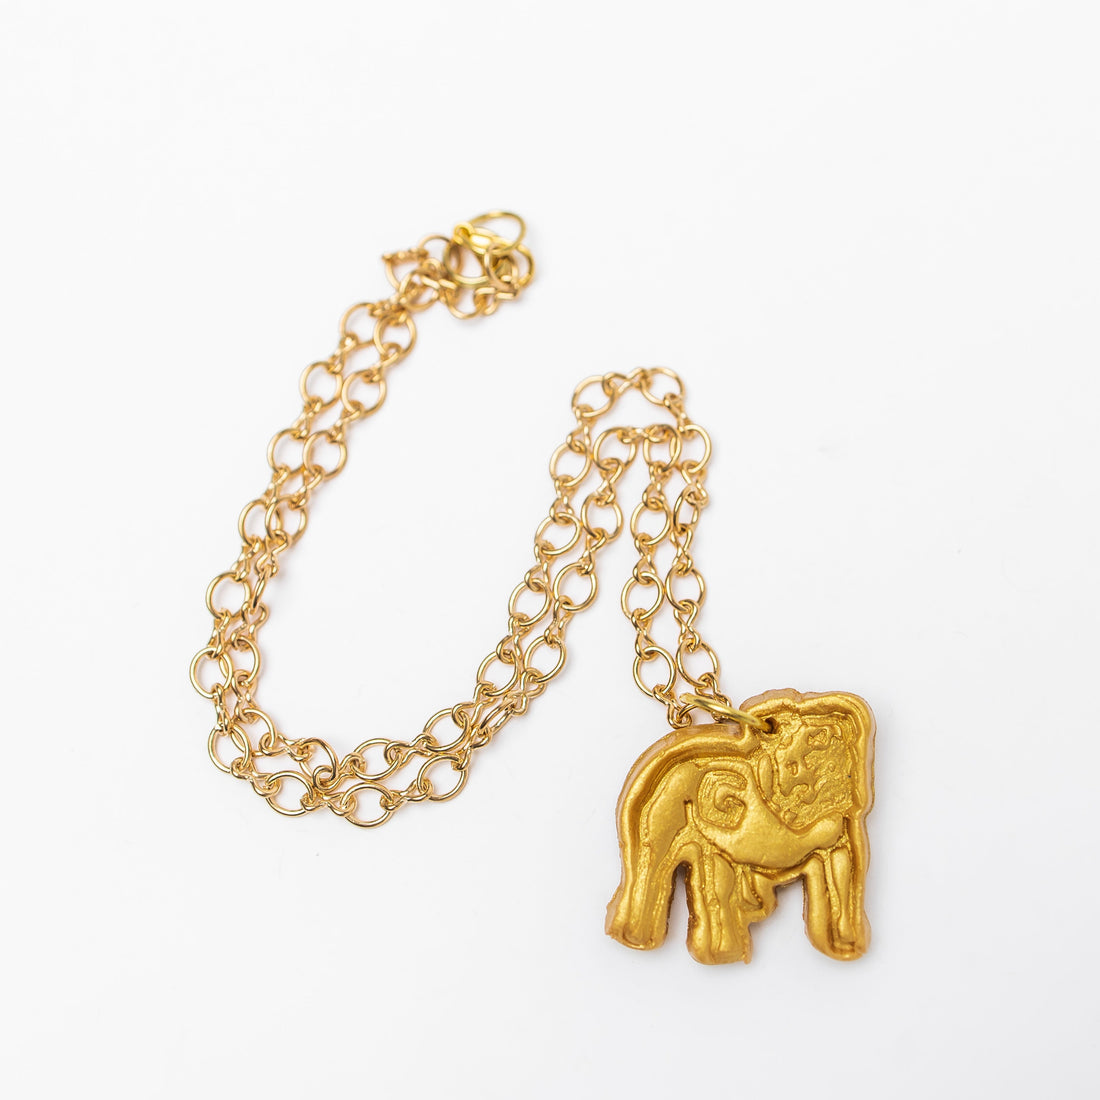 Gold Plated Figure 8 Chain with Bulldog